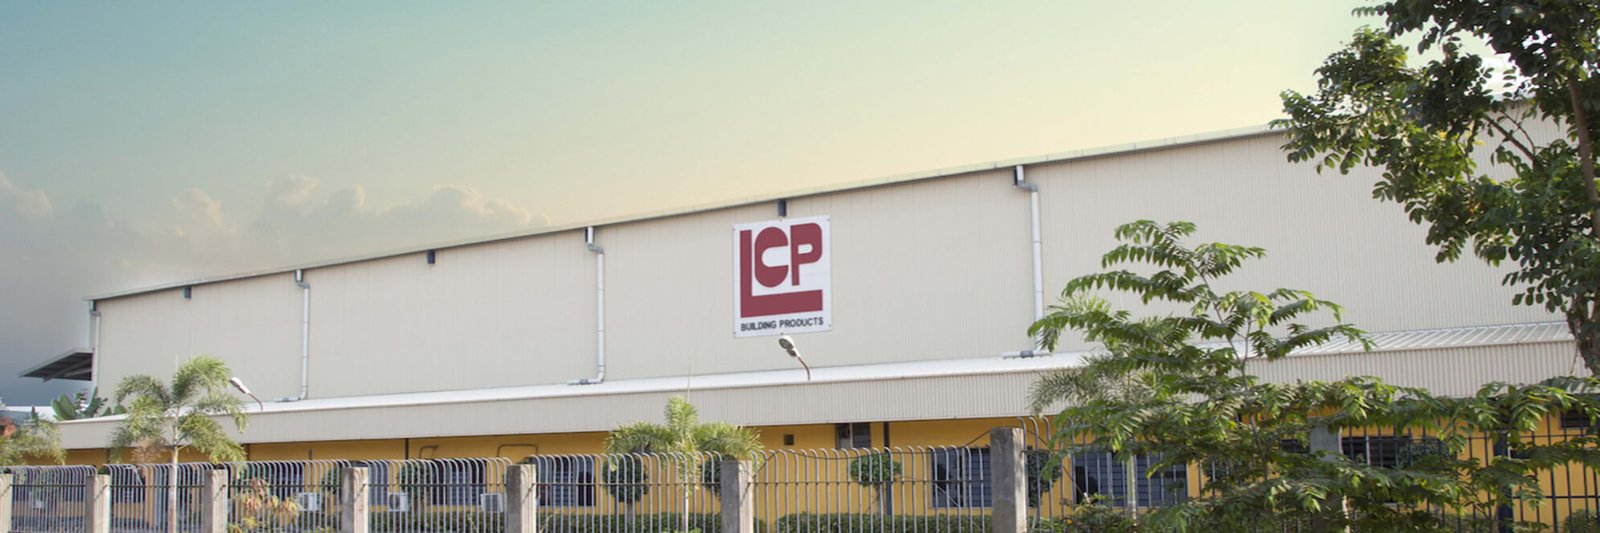 best roof sheet manufacturer in Chennai: LCP Sliders